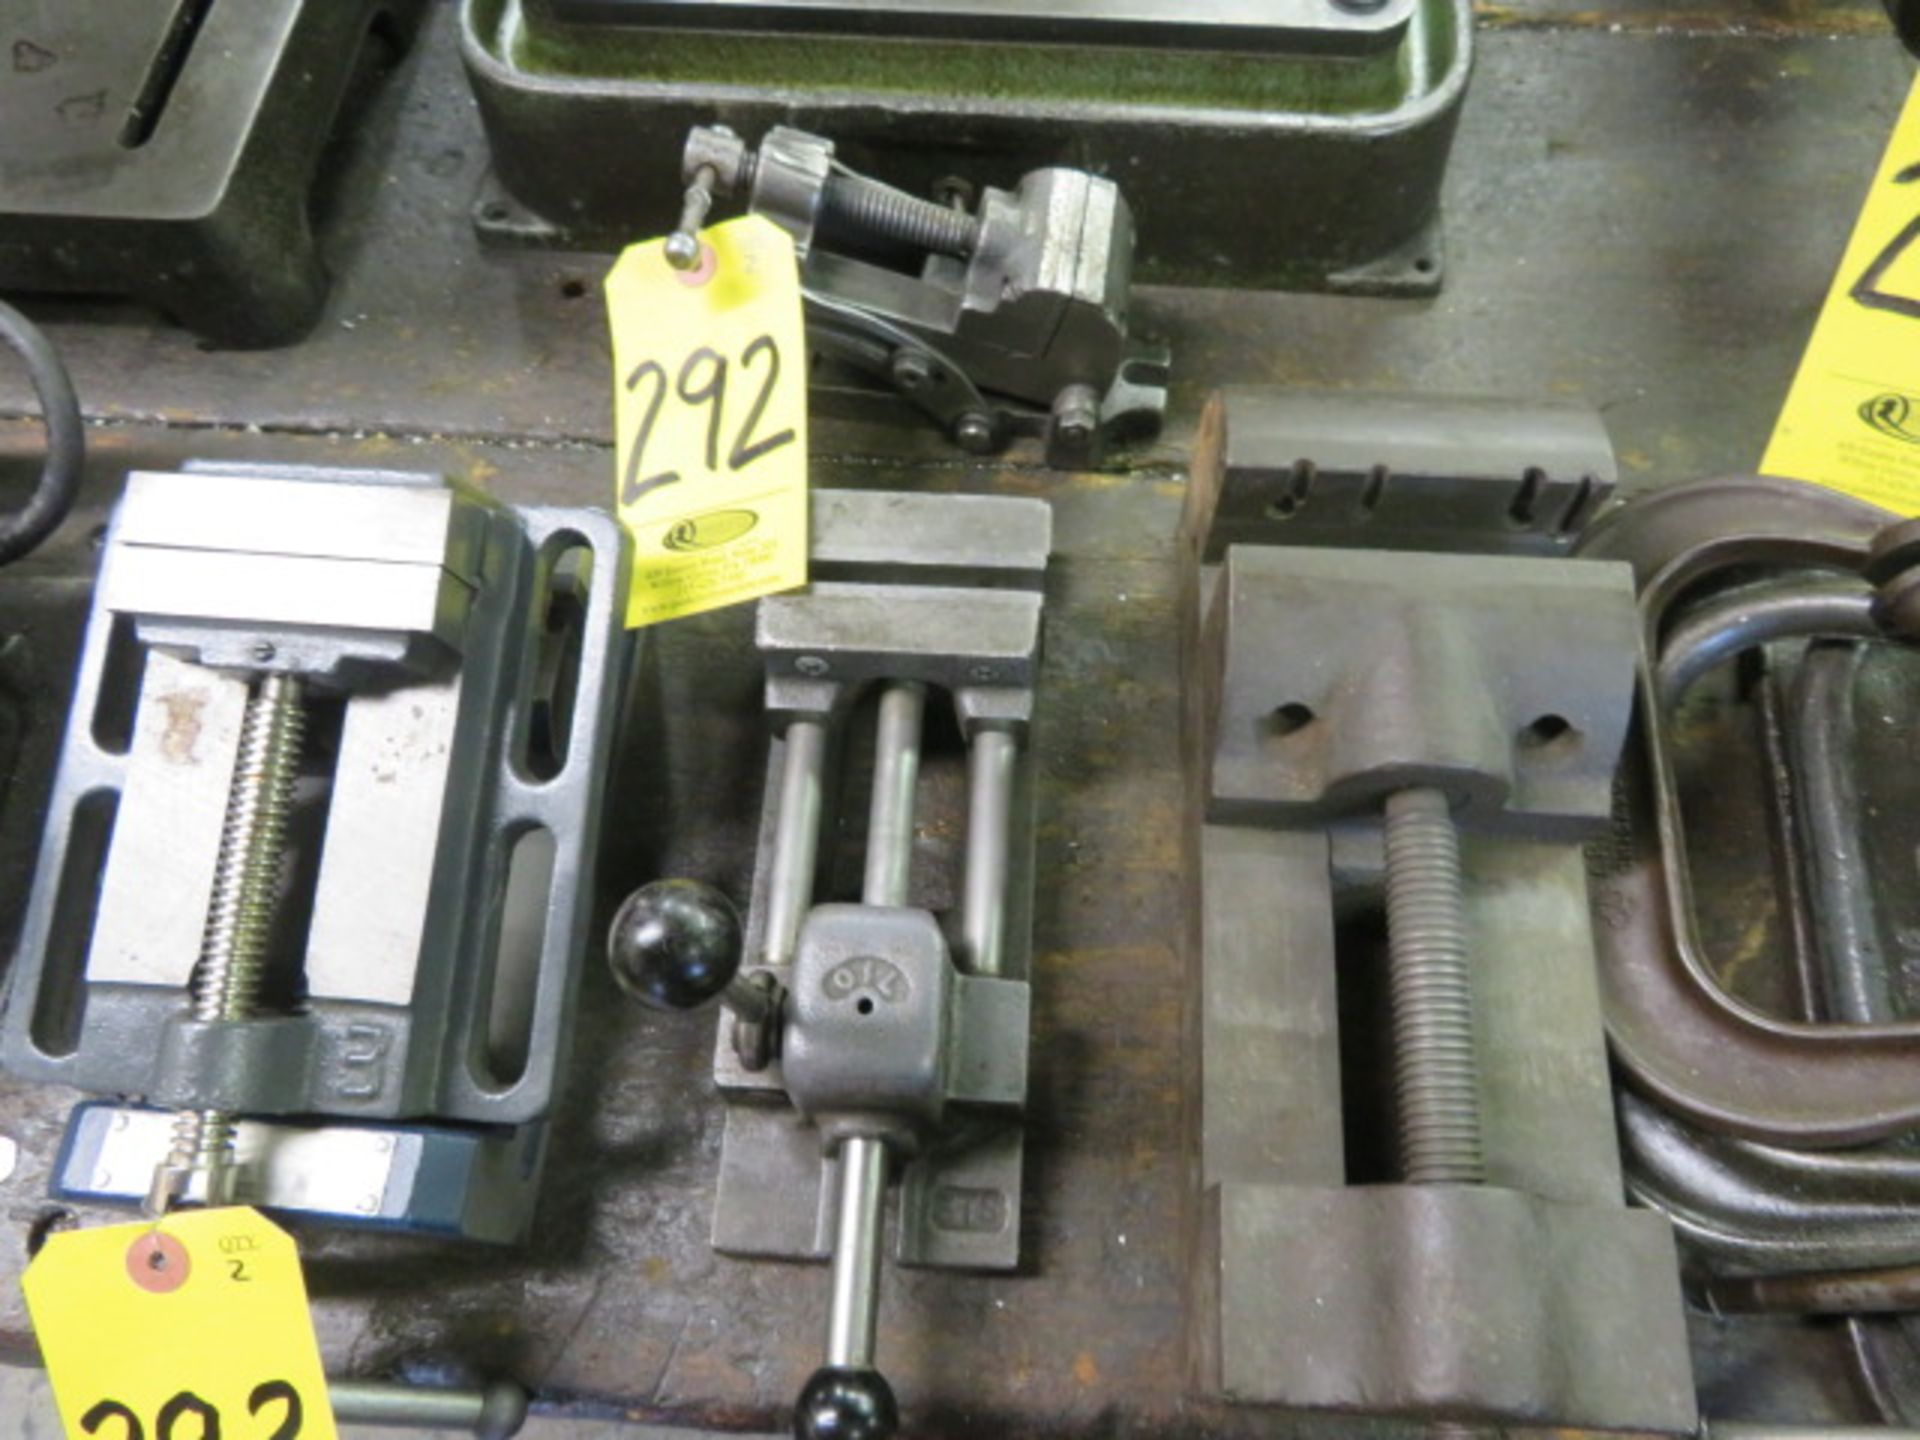 ANGLE VISE AND DRILL PRESS VISE